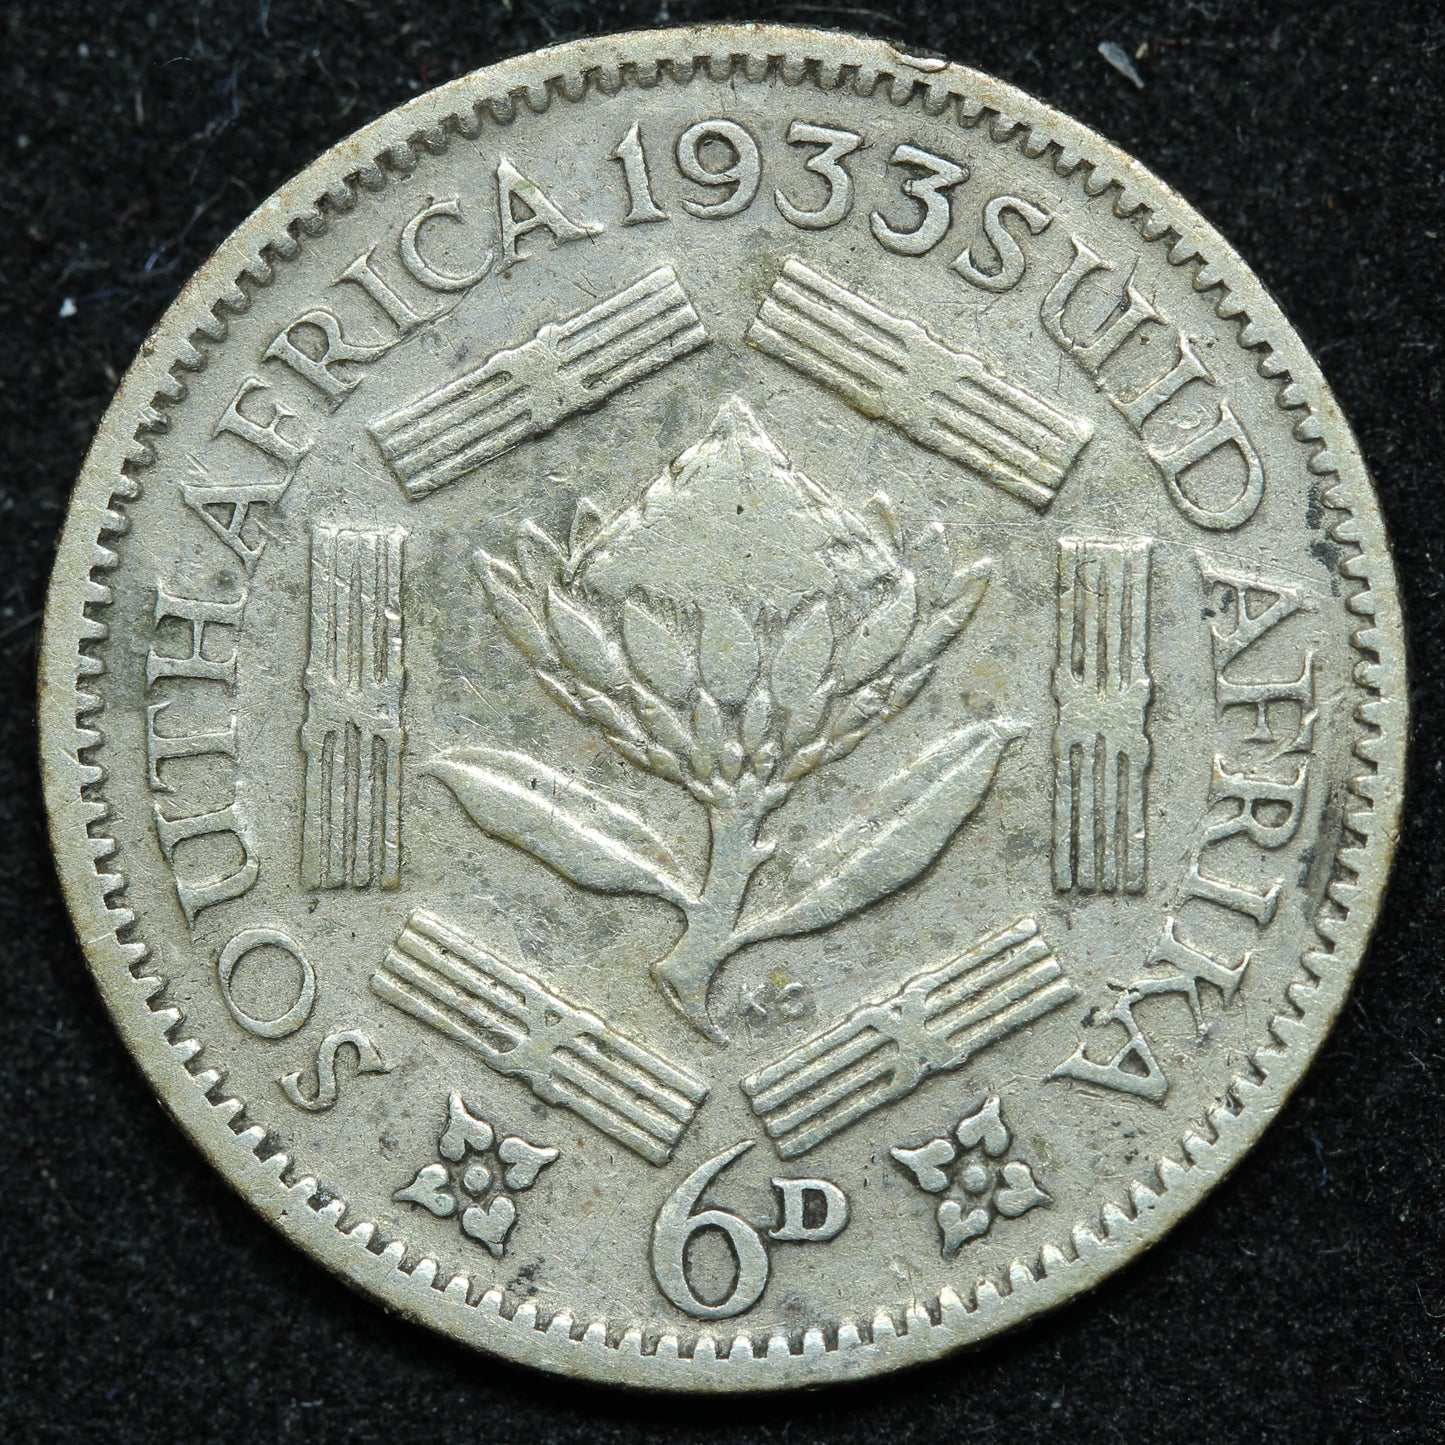 1933 South Africa 6 Six Pence Silver Coin - KM# 16.2